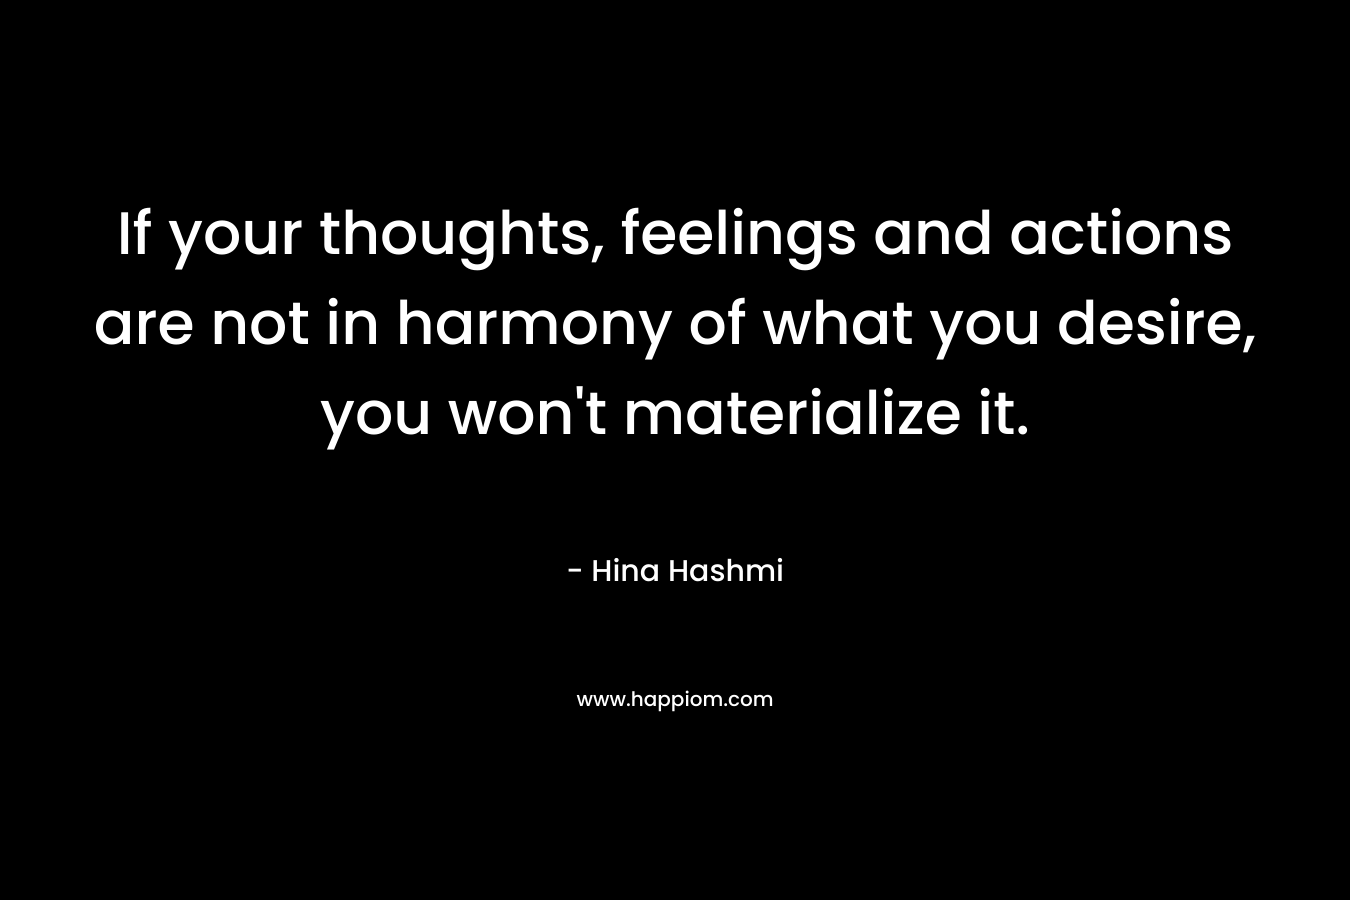 If your thoughts, feelings and actions are not in harmony of what you desire, you won't materialize it.